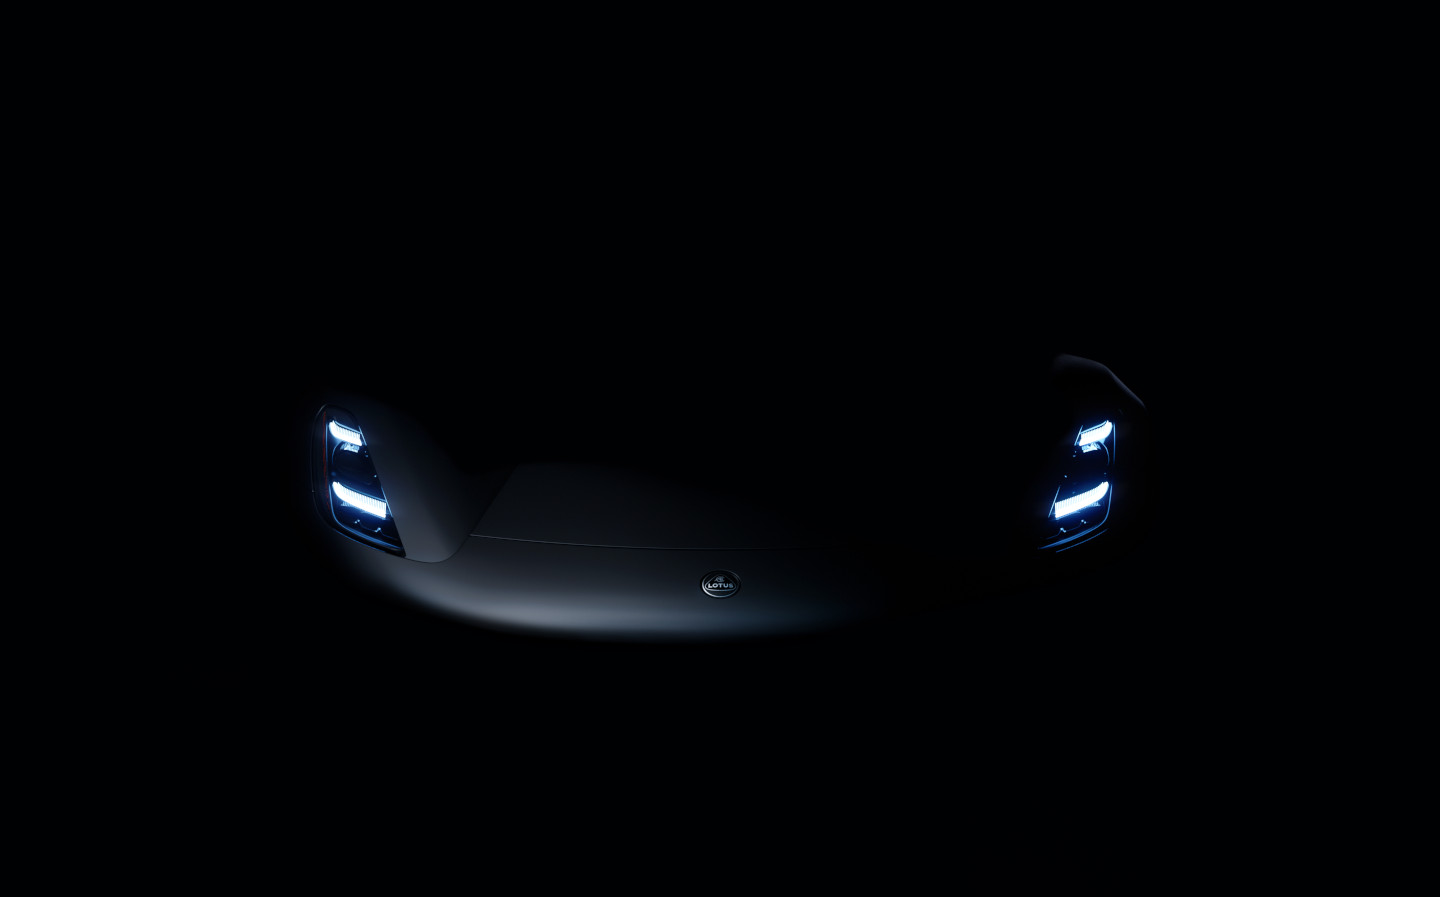 New Lotus sports car will be called the Emira